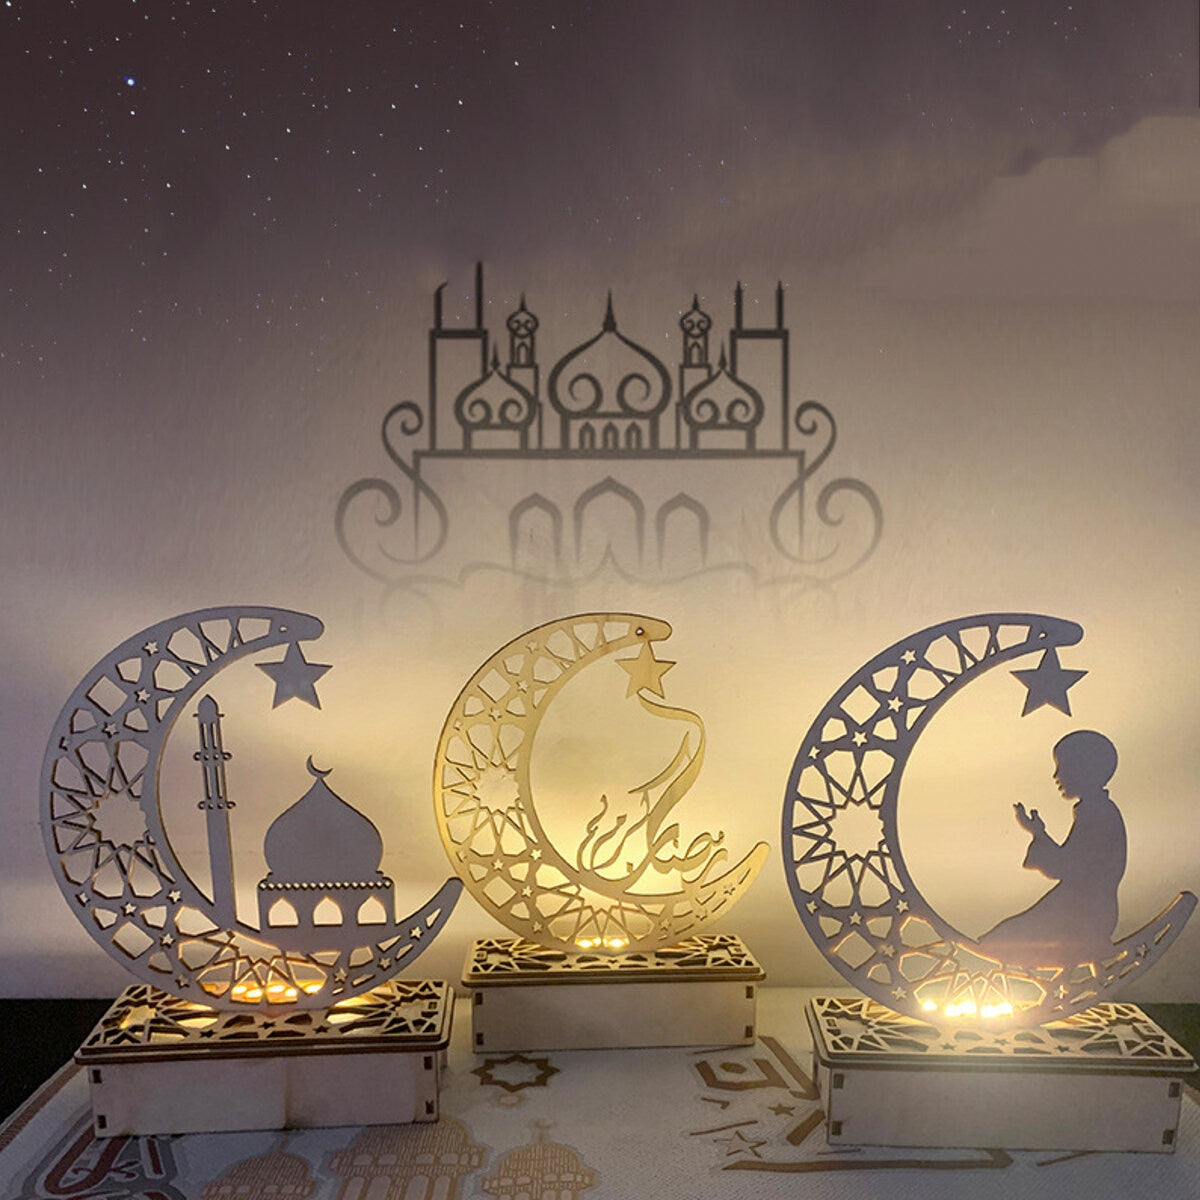 EID Ornaments Light Decoration For Home